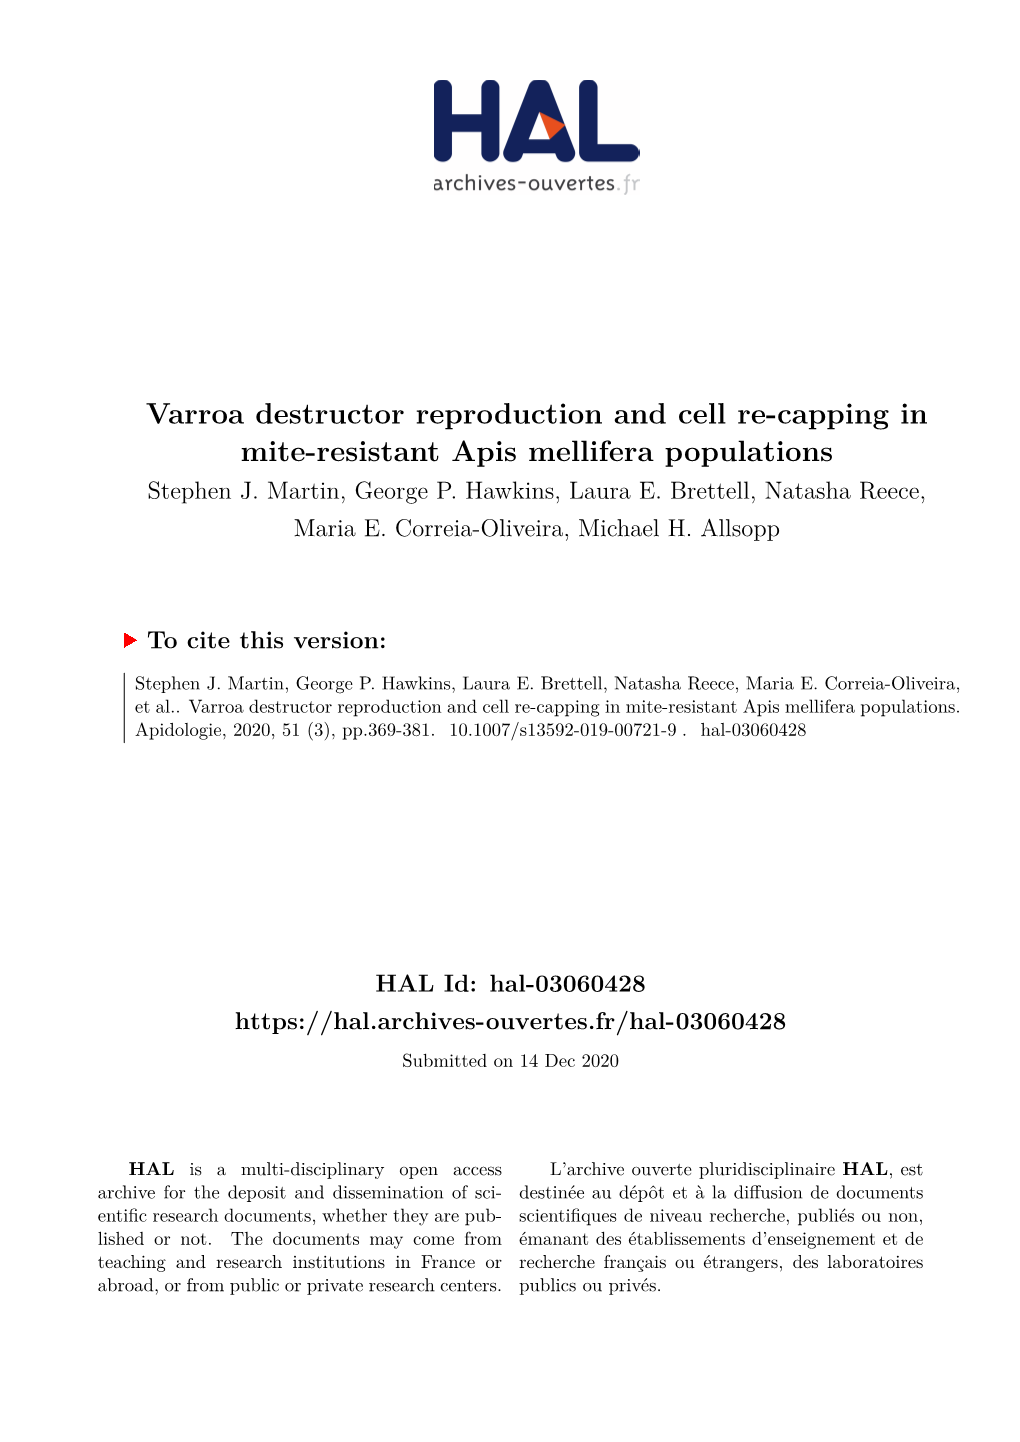 Varroa Destructor Reproduction and Cell Re-Capping in Mite-Resistant Apis Mellifera Populations Stephen J